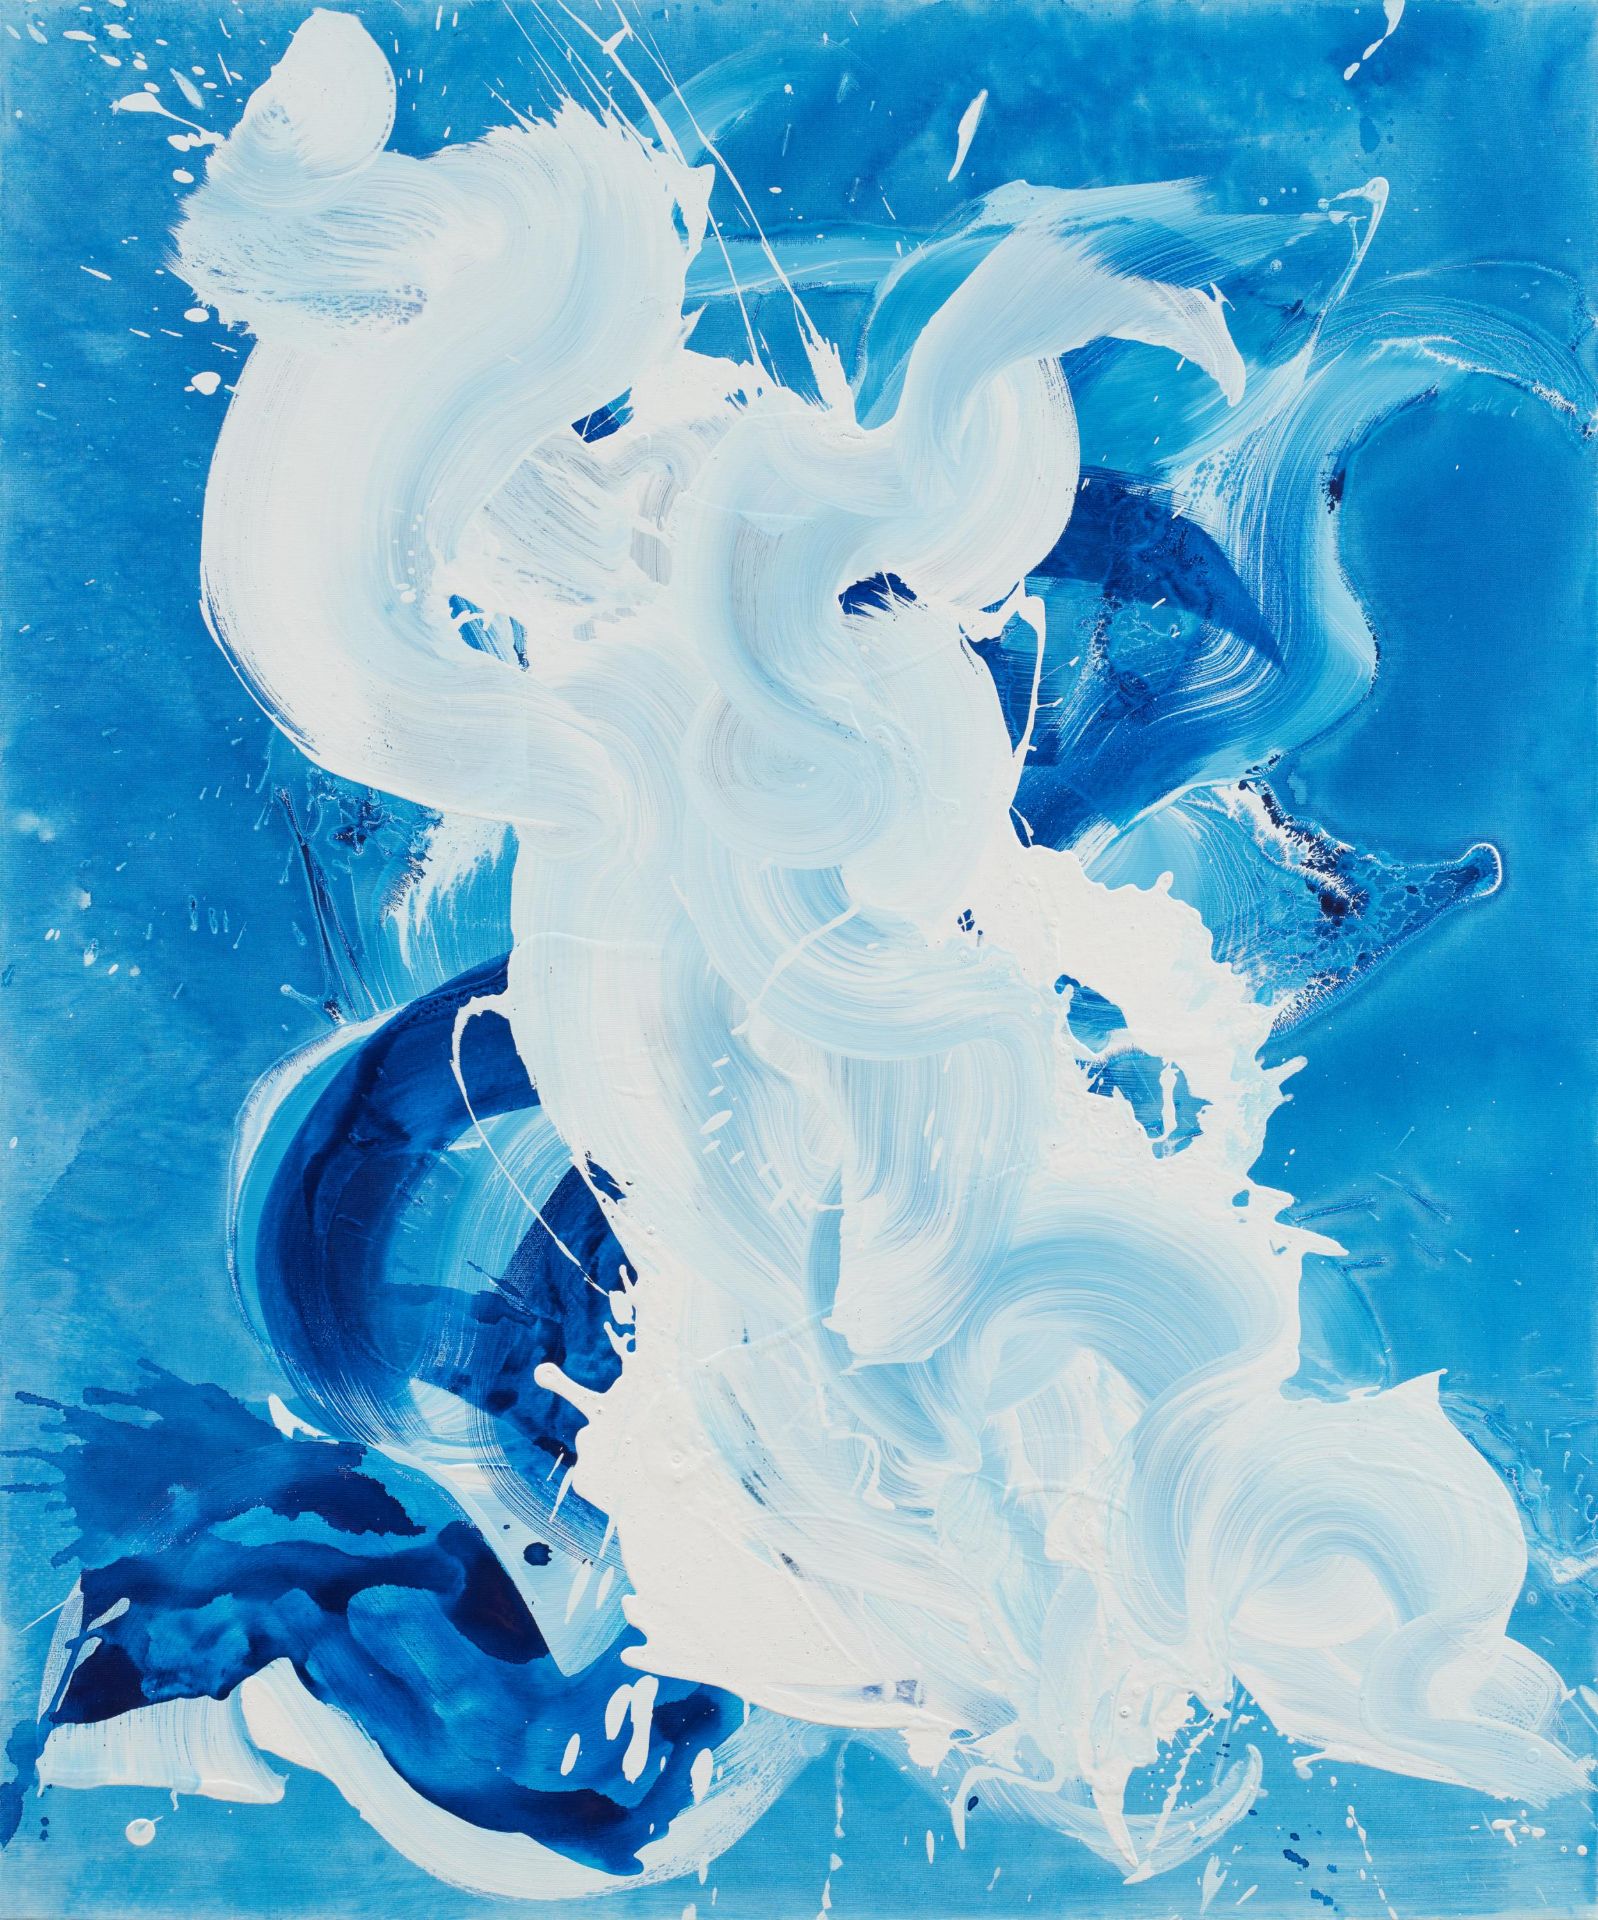 Conor Mccreedy: Blue and White Ocean - Image 2 of 8